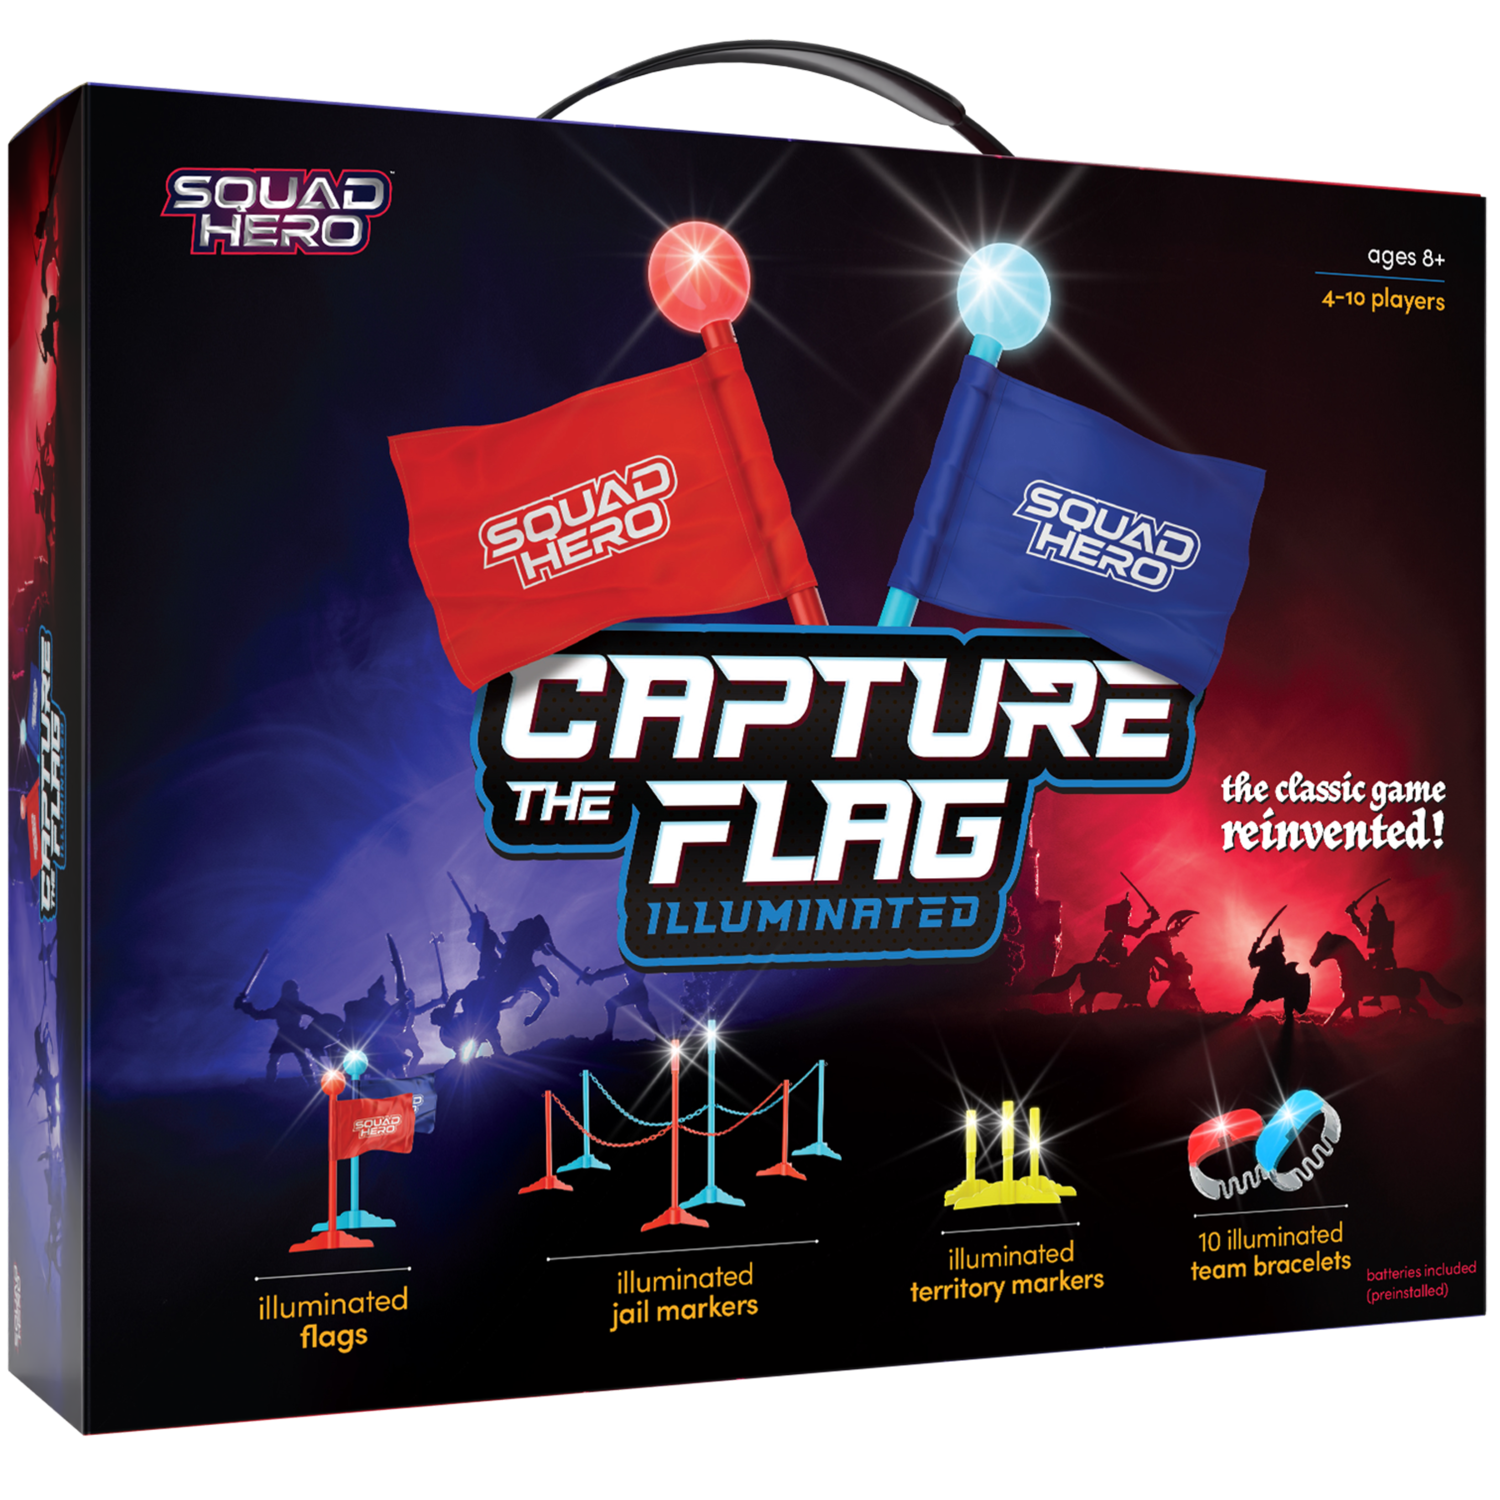 Capture the Flag game at